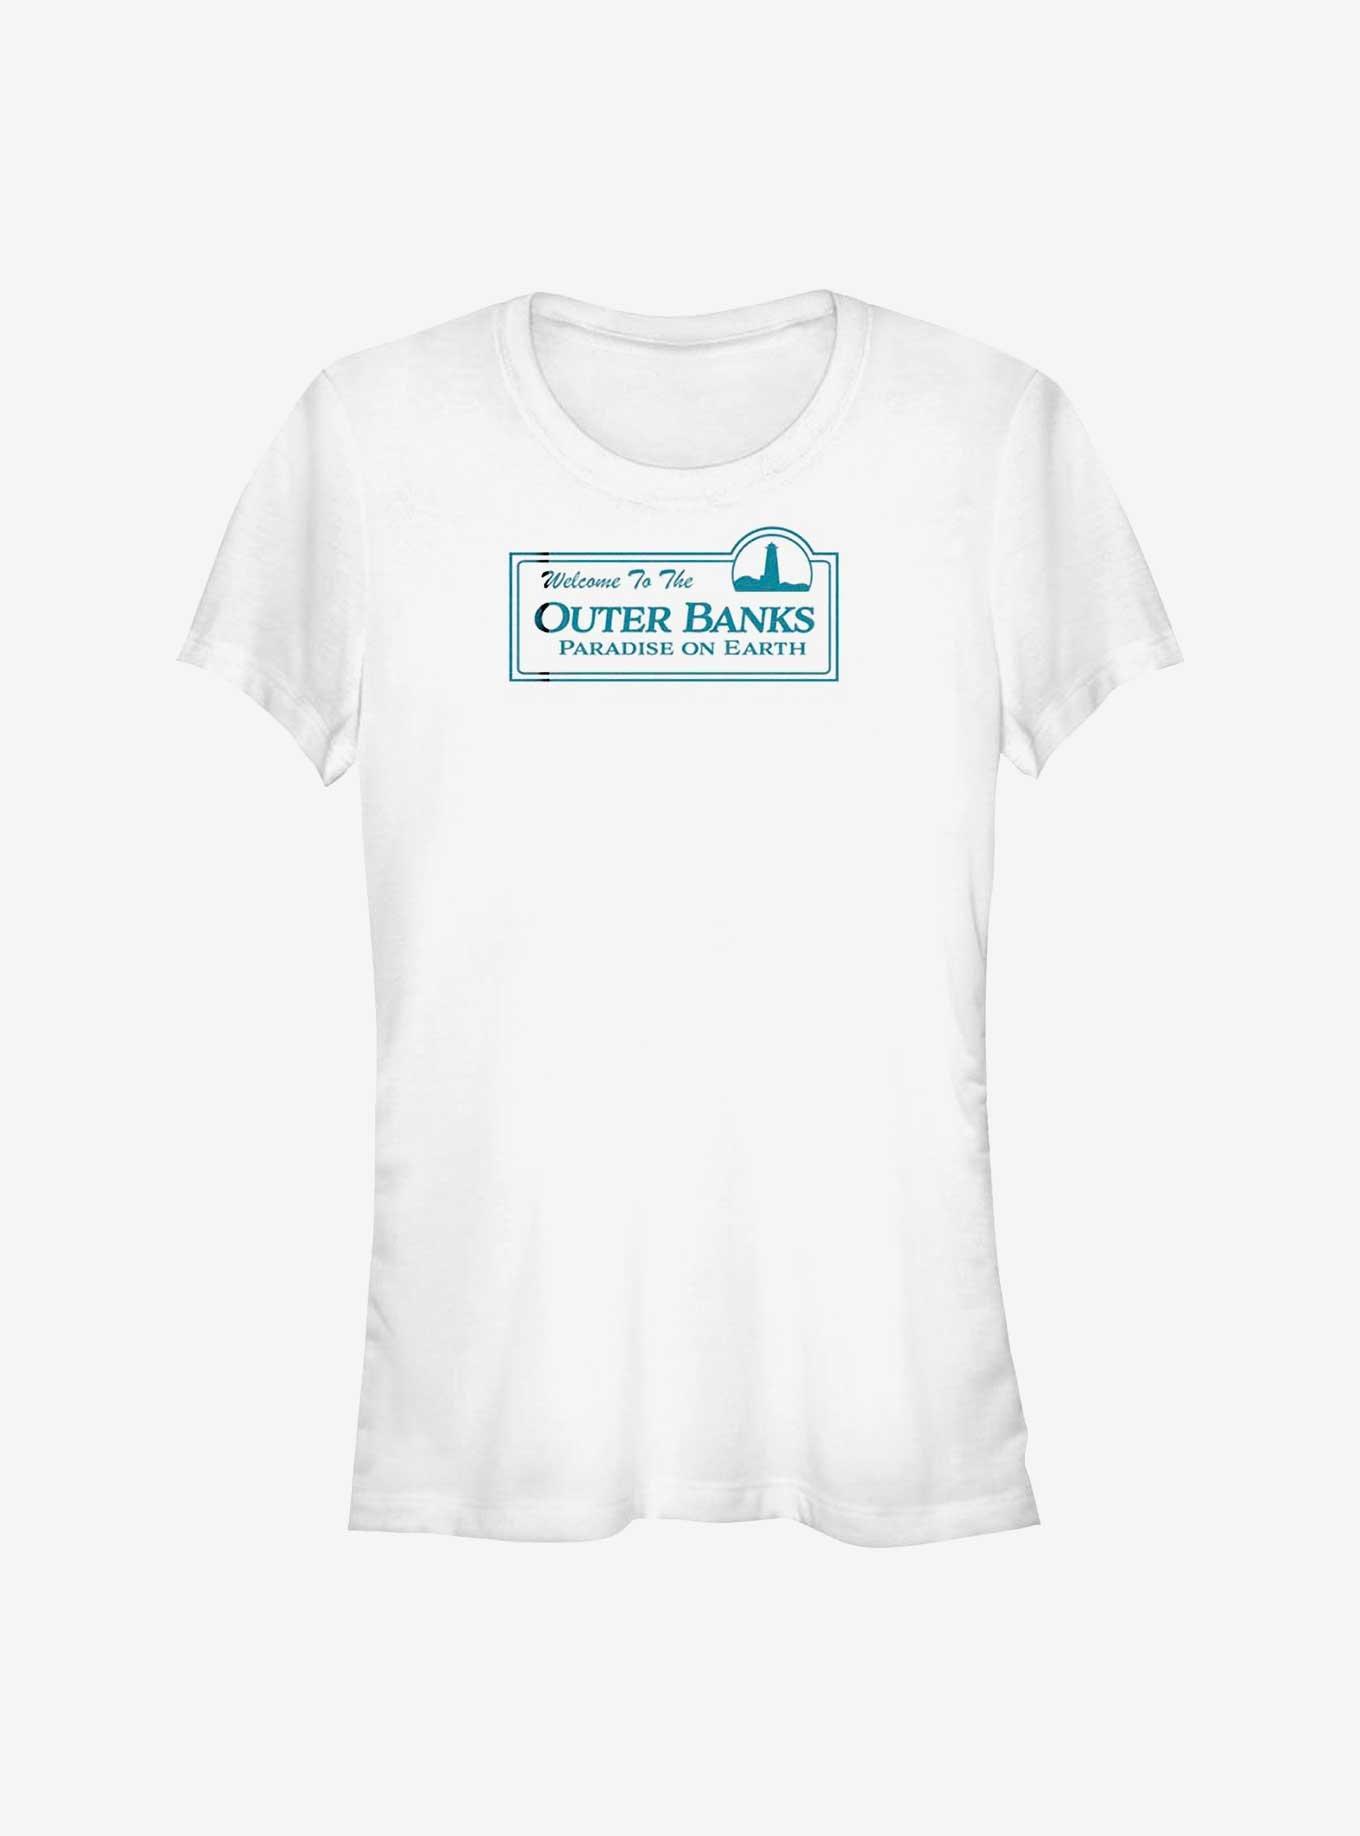 Outer Banks Paradise On Earth Welcome Sign Girls T-Shirt